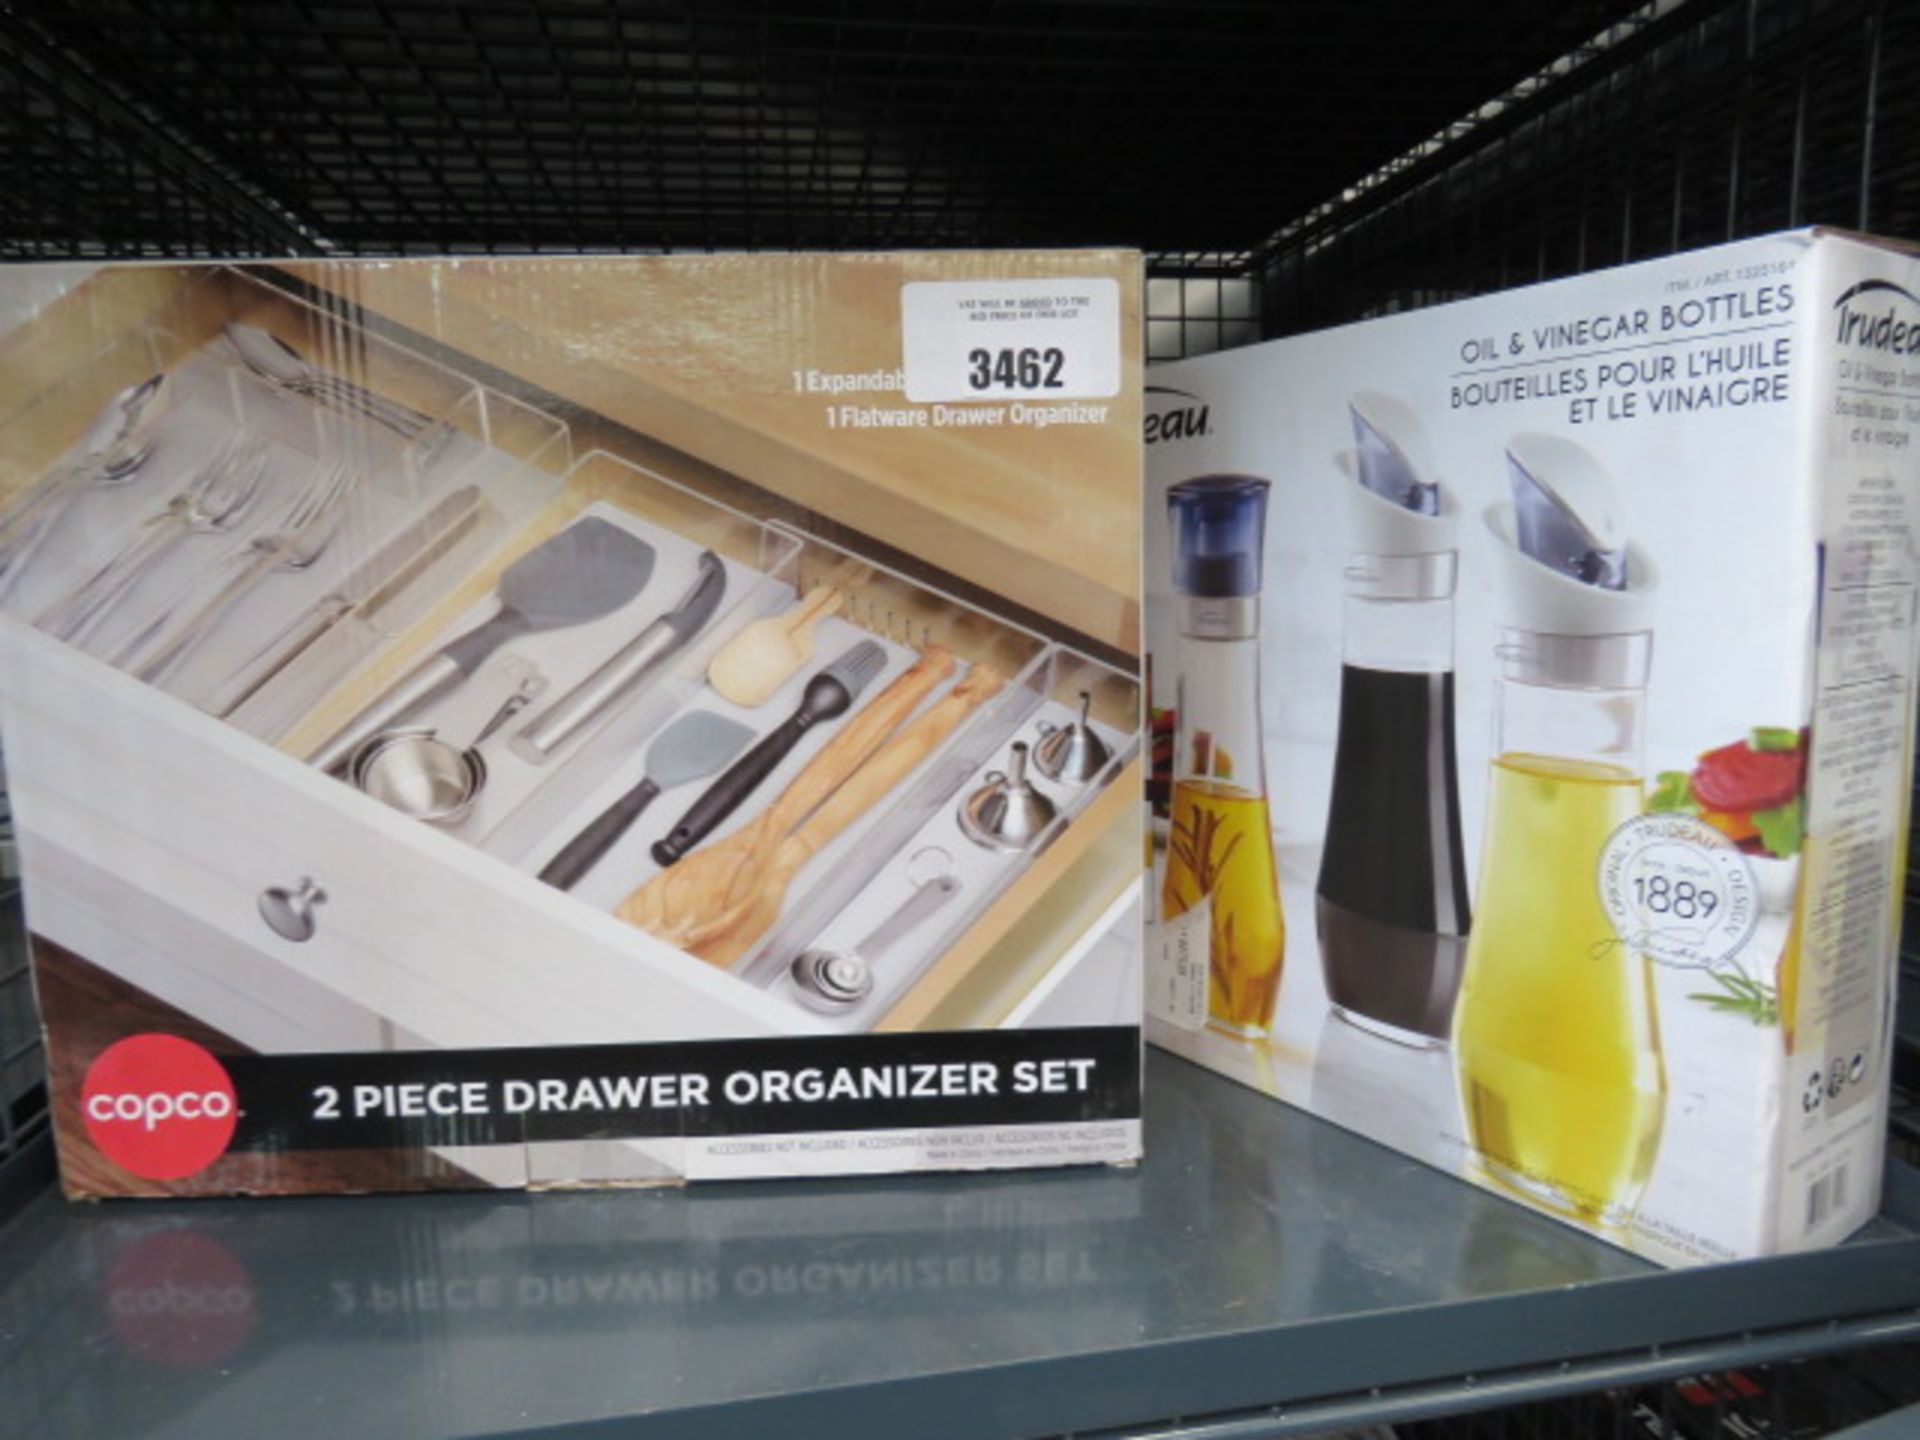 Two piece drawer organiser set and an oil and vinegar bottle set